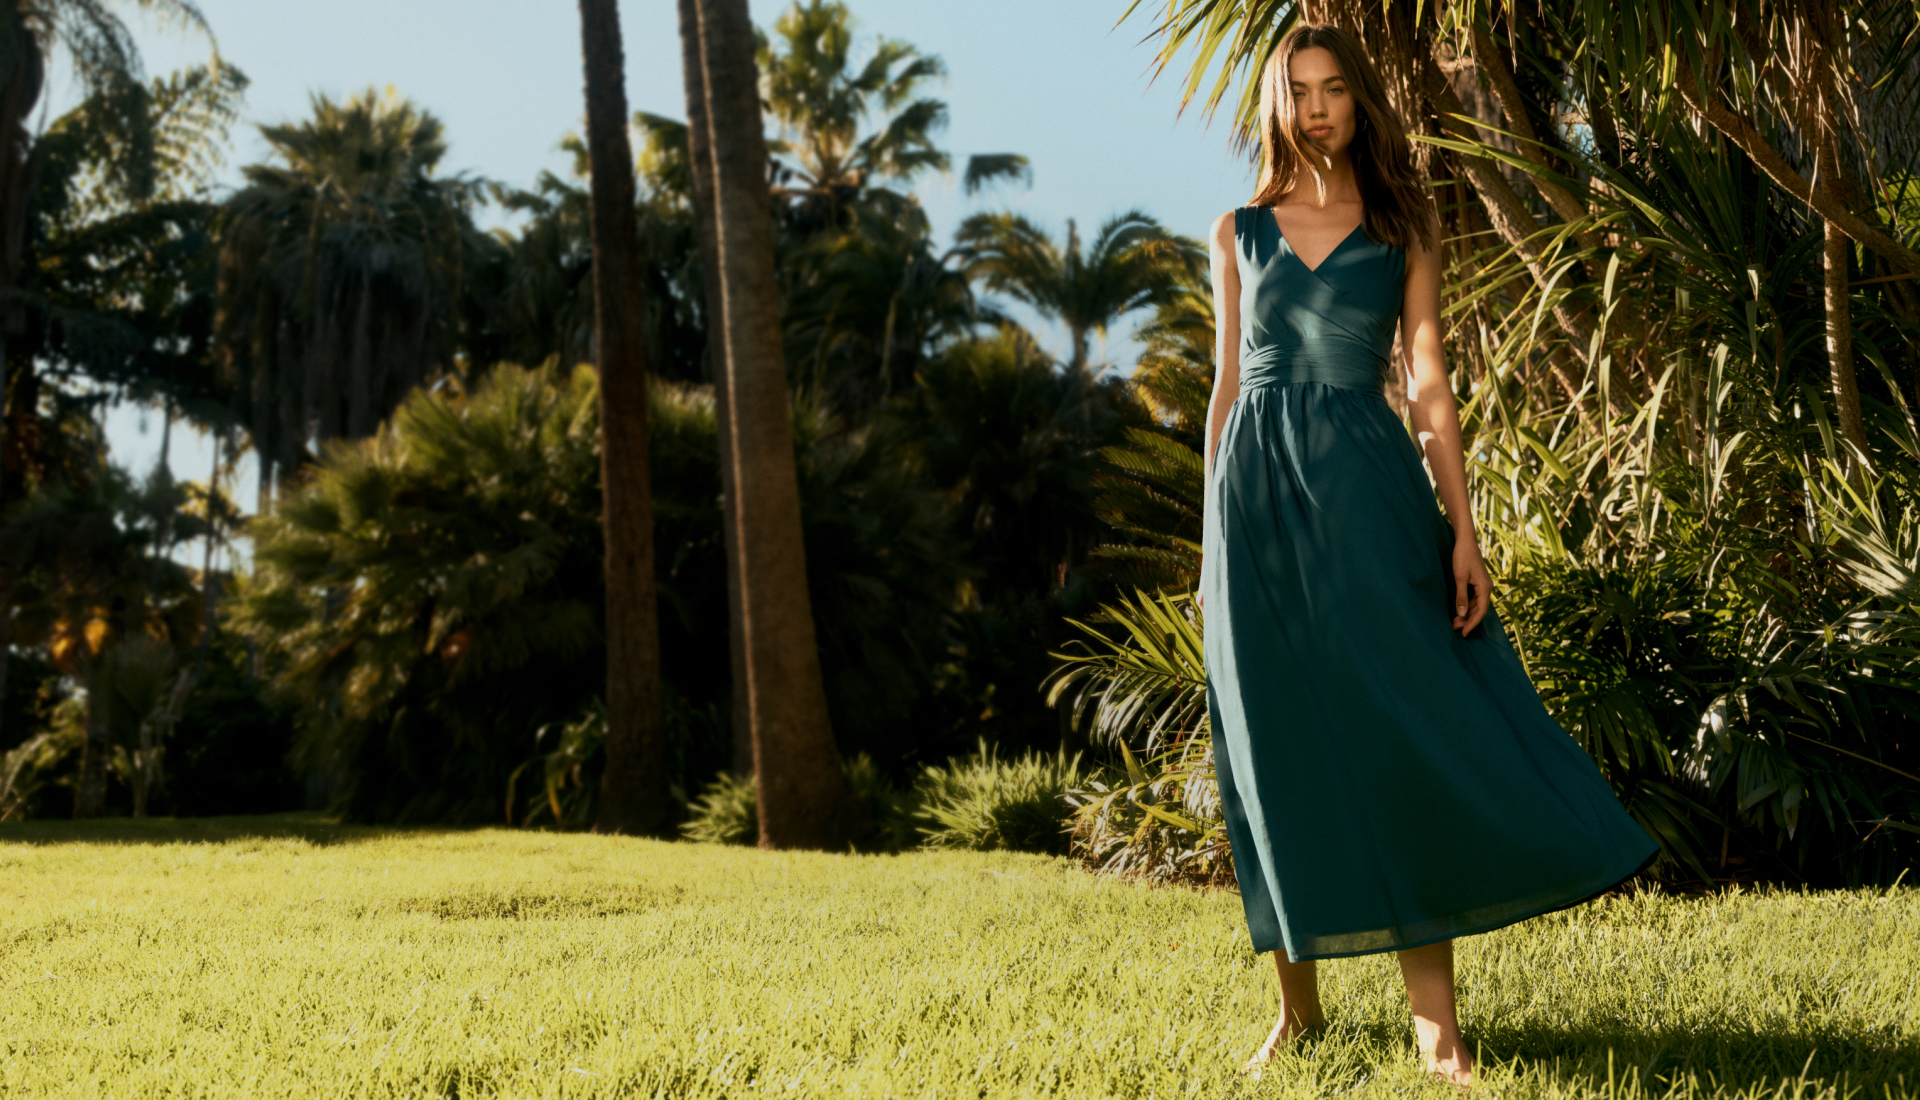 Dress Perfection. From a stunning maxi to a modern mini, find the statement warm-weather silhouette that fits you best. Shop Dresses.